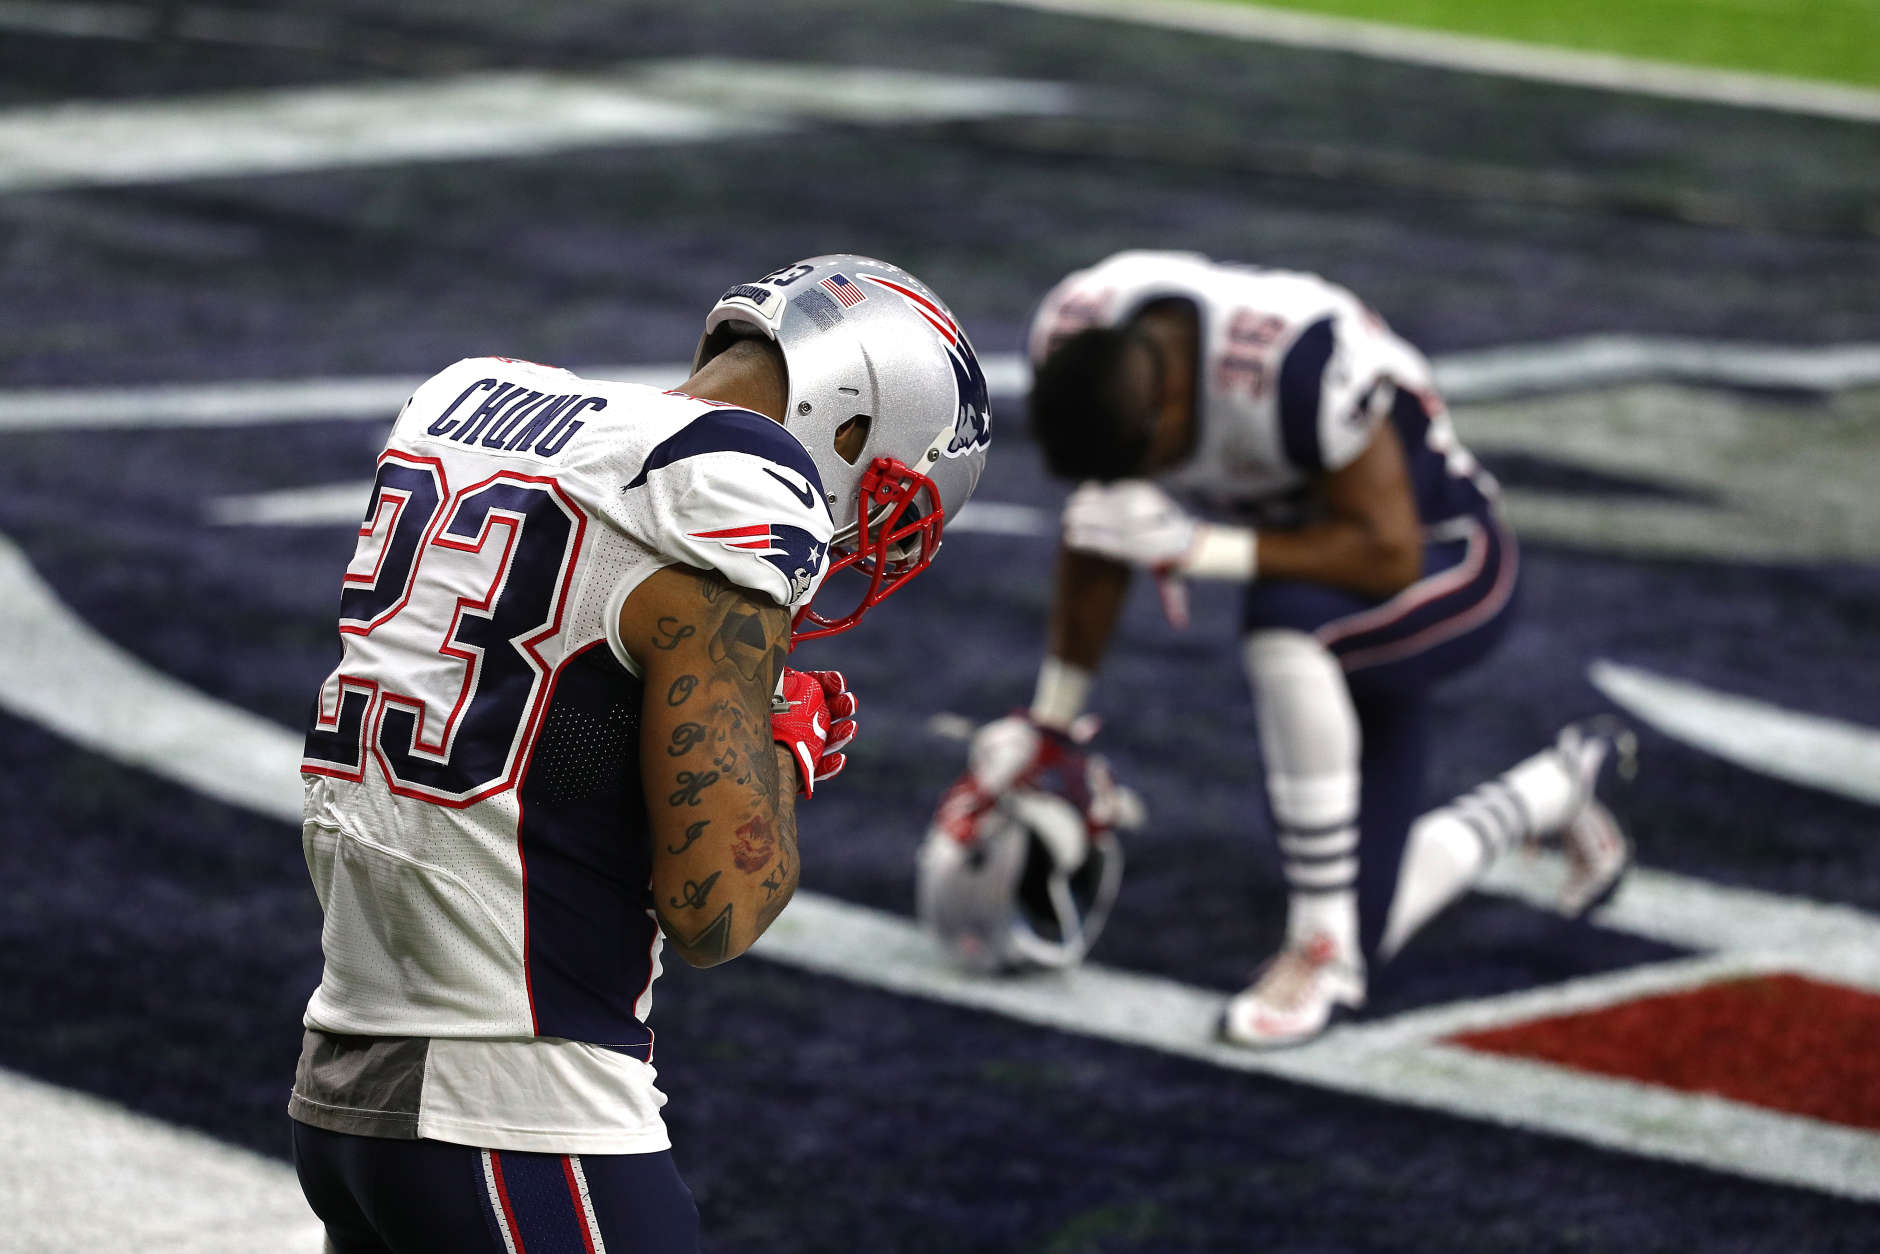 HOUSTON, TX - FEBRUARY 05: Patrick Chung #23 of the New England Patriots takes a moment prior to Super Bowl 51 against the Atlanta Falcons at NRG Stadium on February 5, 2017 in Houston, Texas.  (Photo by Patrick Smith/Getty Images)